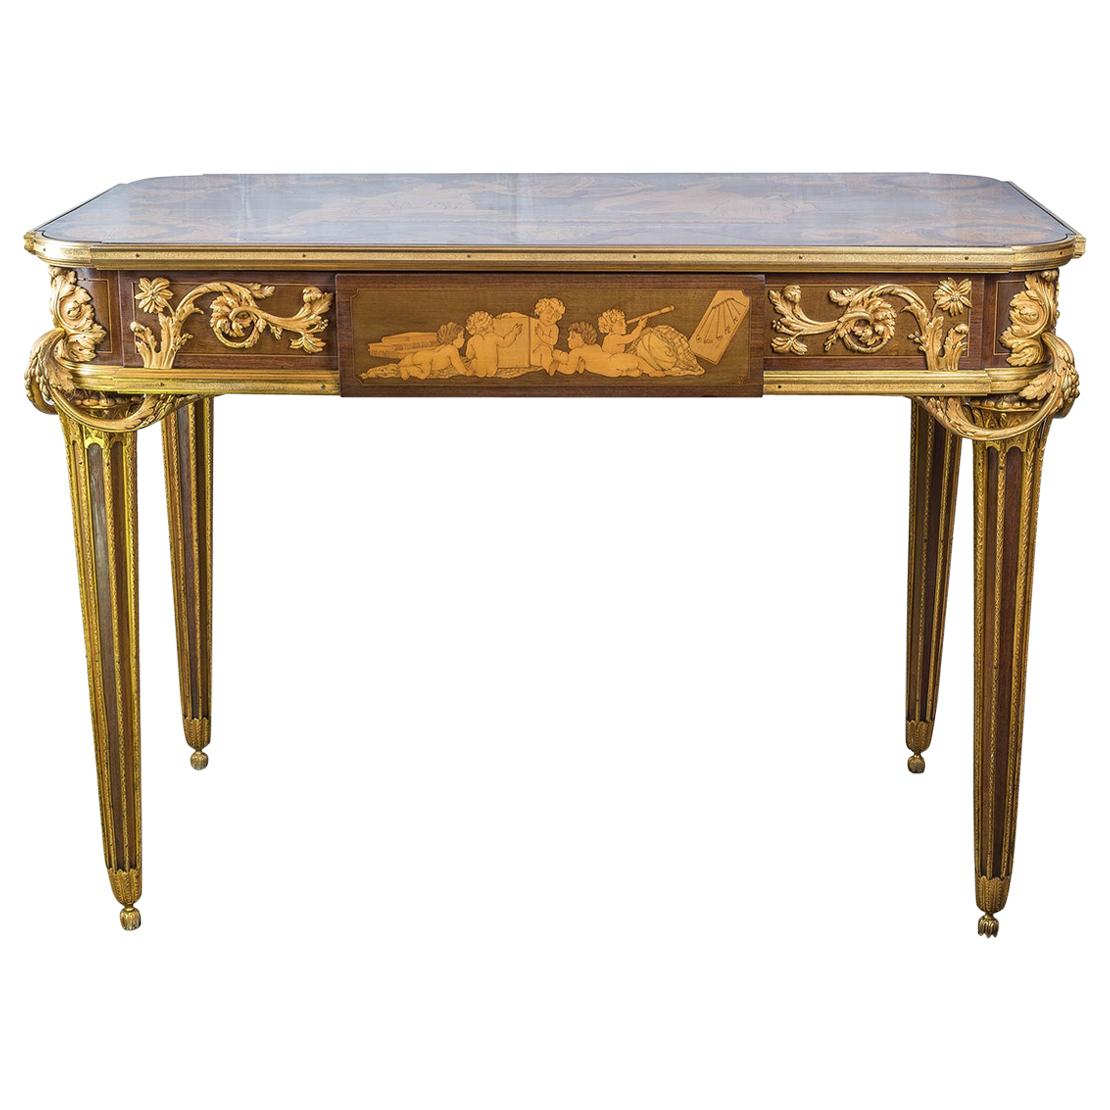 19th Century French Ormolu Mounted Marquetry Center Table by E. Khan & Cie.